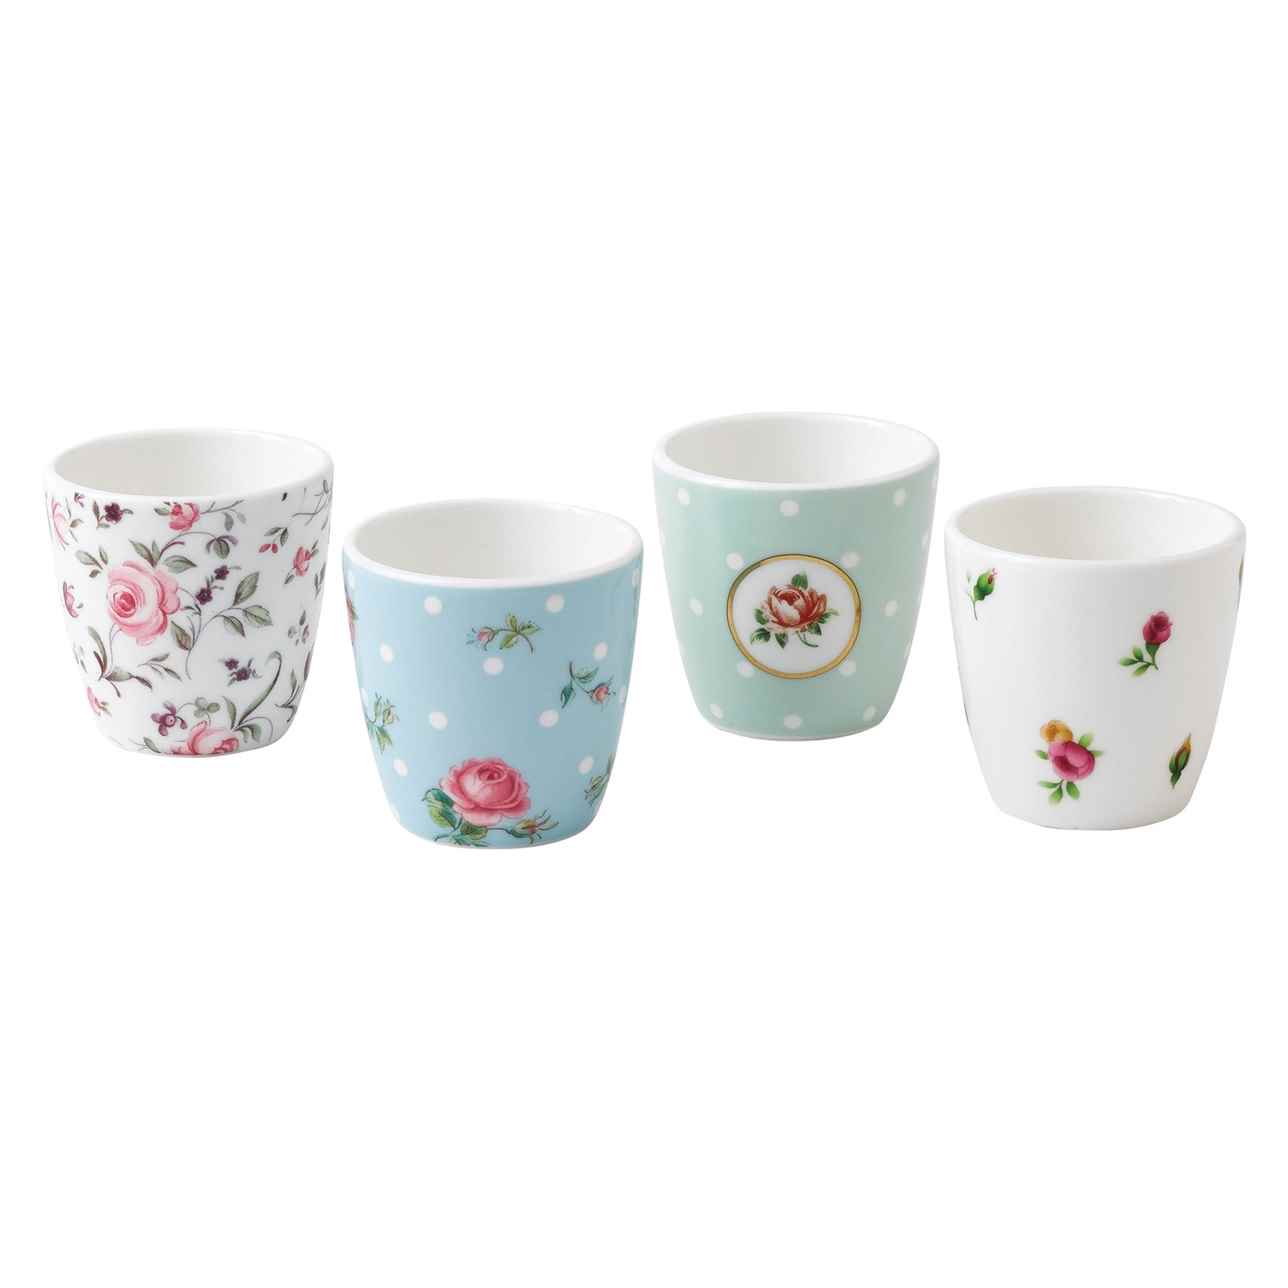 Royal Albert Giftware Small Cups / Egg Cup, Set of 4